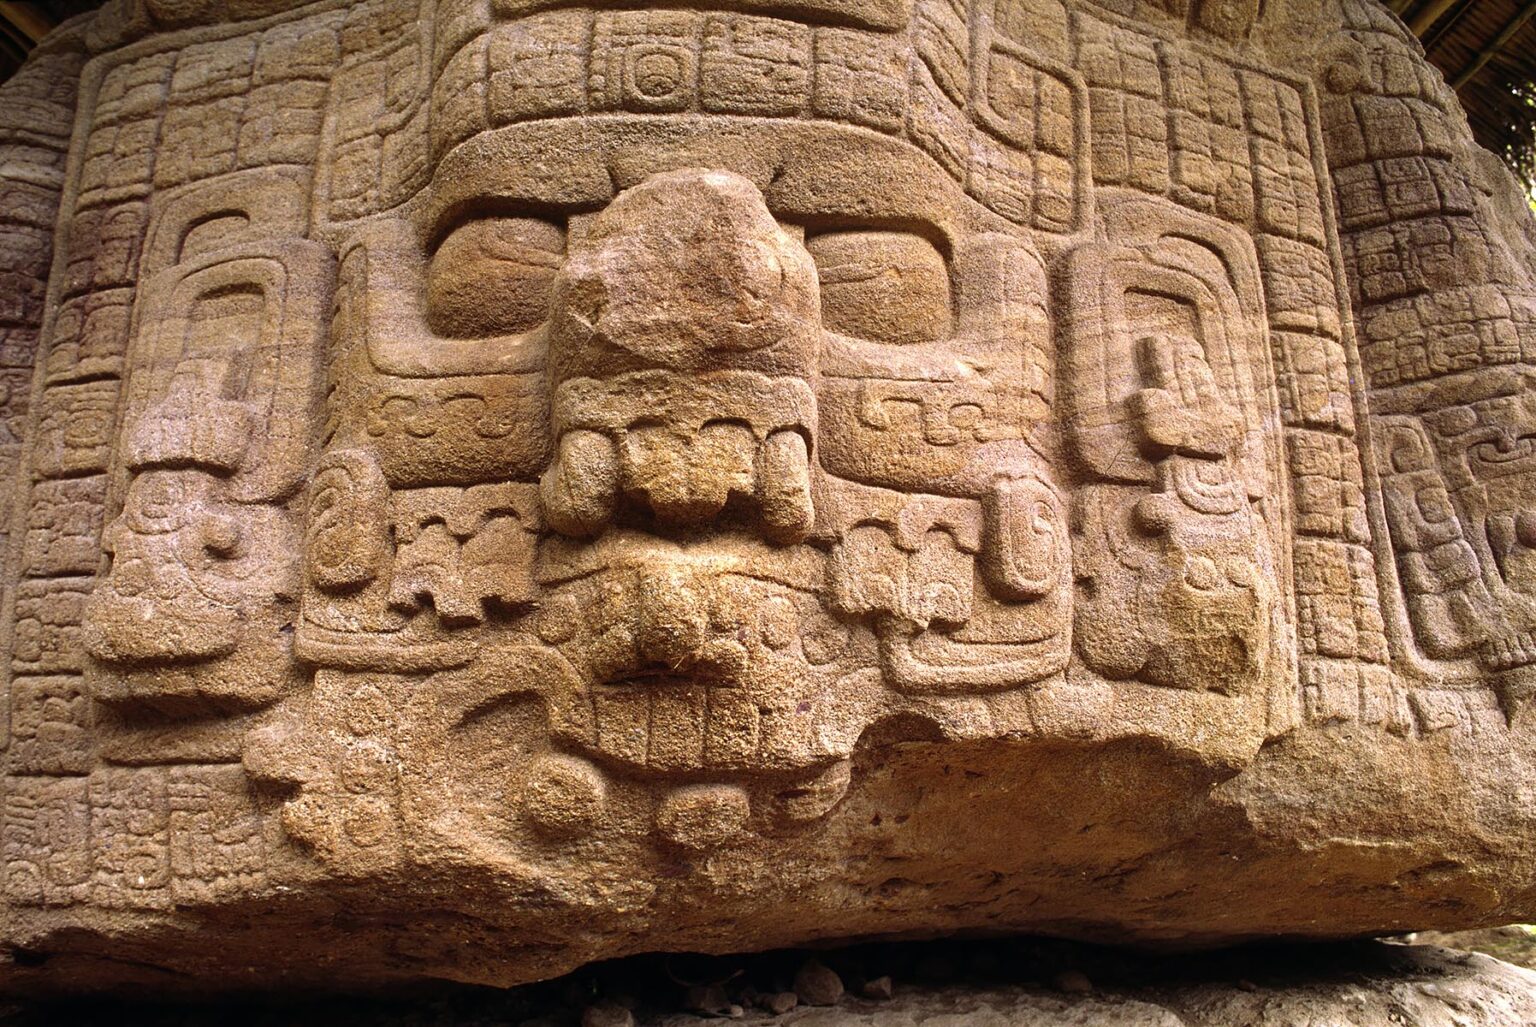 MAYAN ZOOMORPH, dated to 795 AD, with beautifully carved GLYPHS and face of god or ruler - QUIRIGUA RUINS, GAUTEMALA